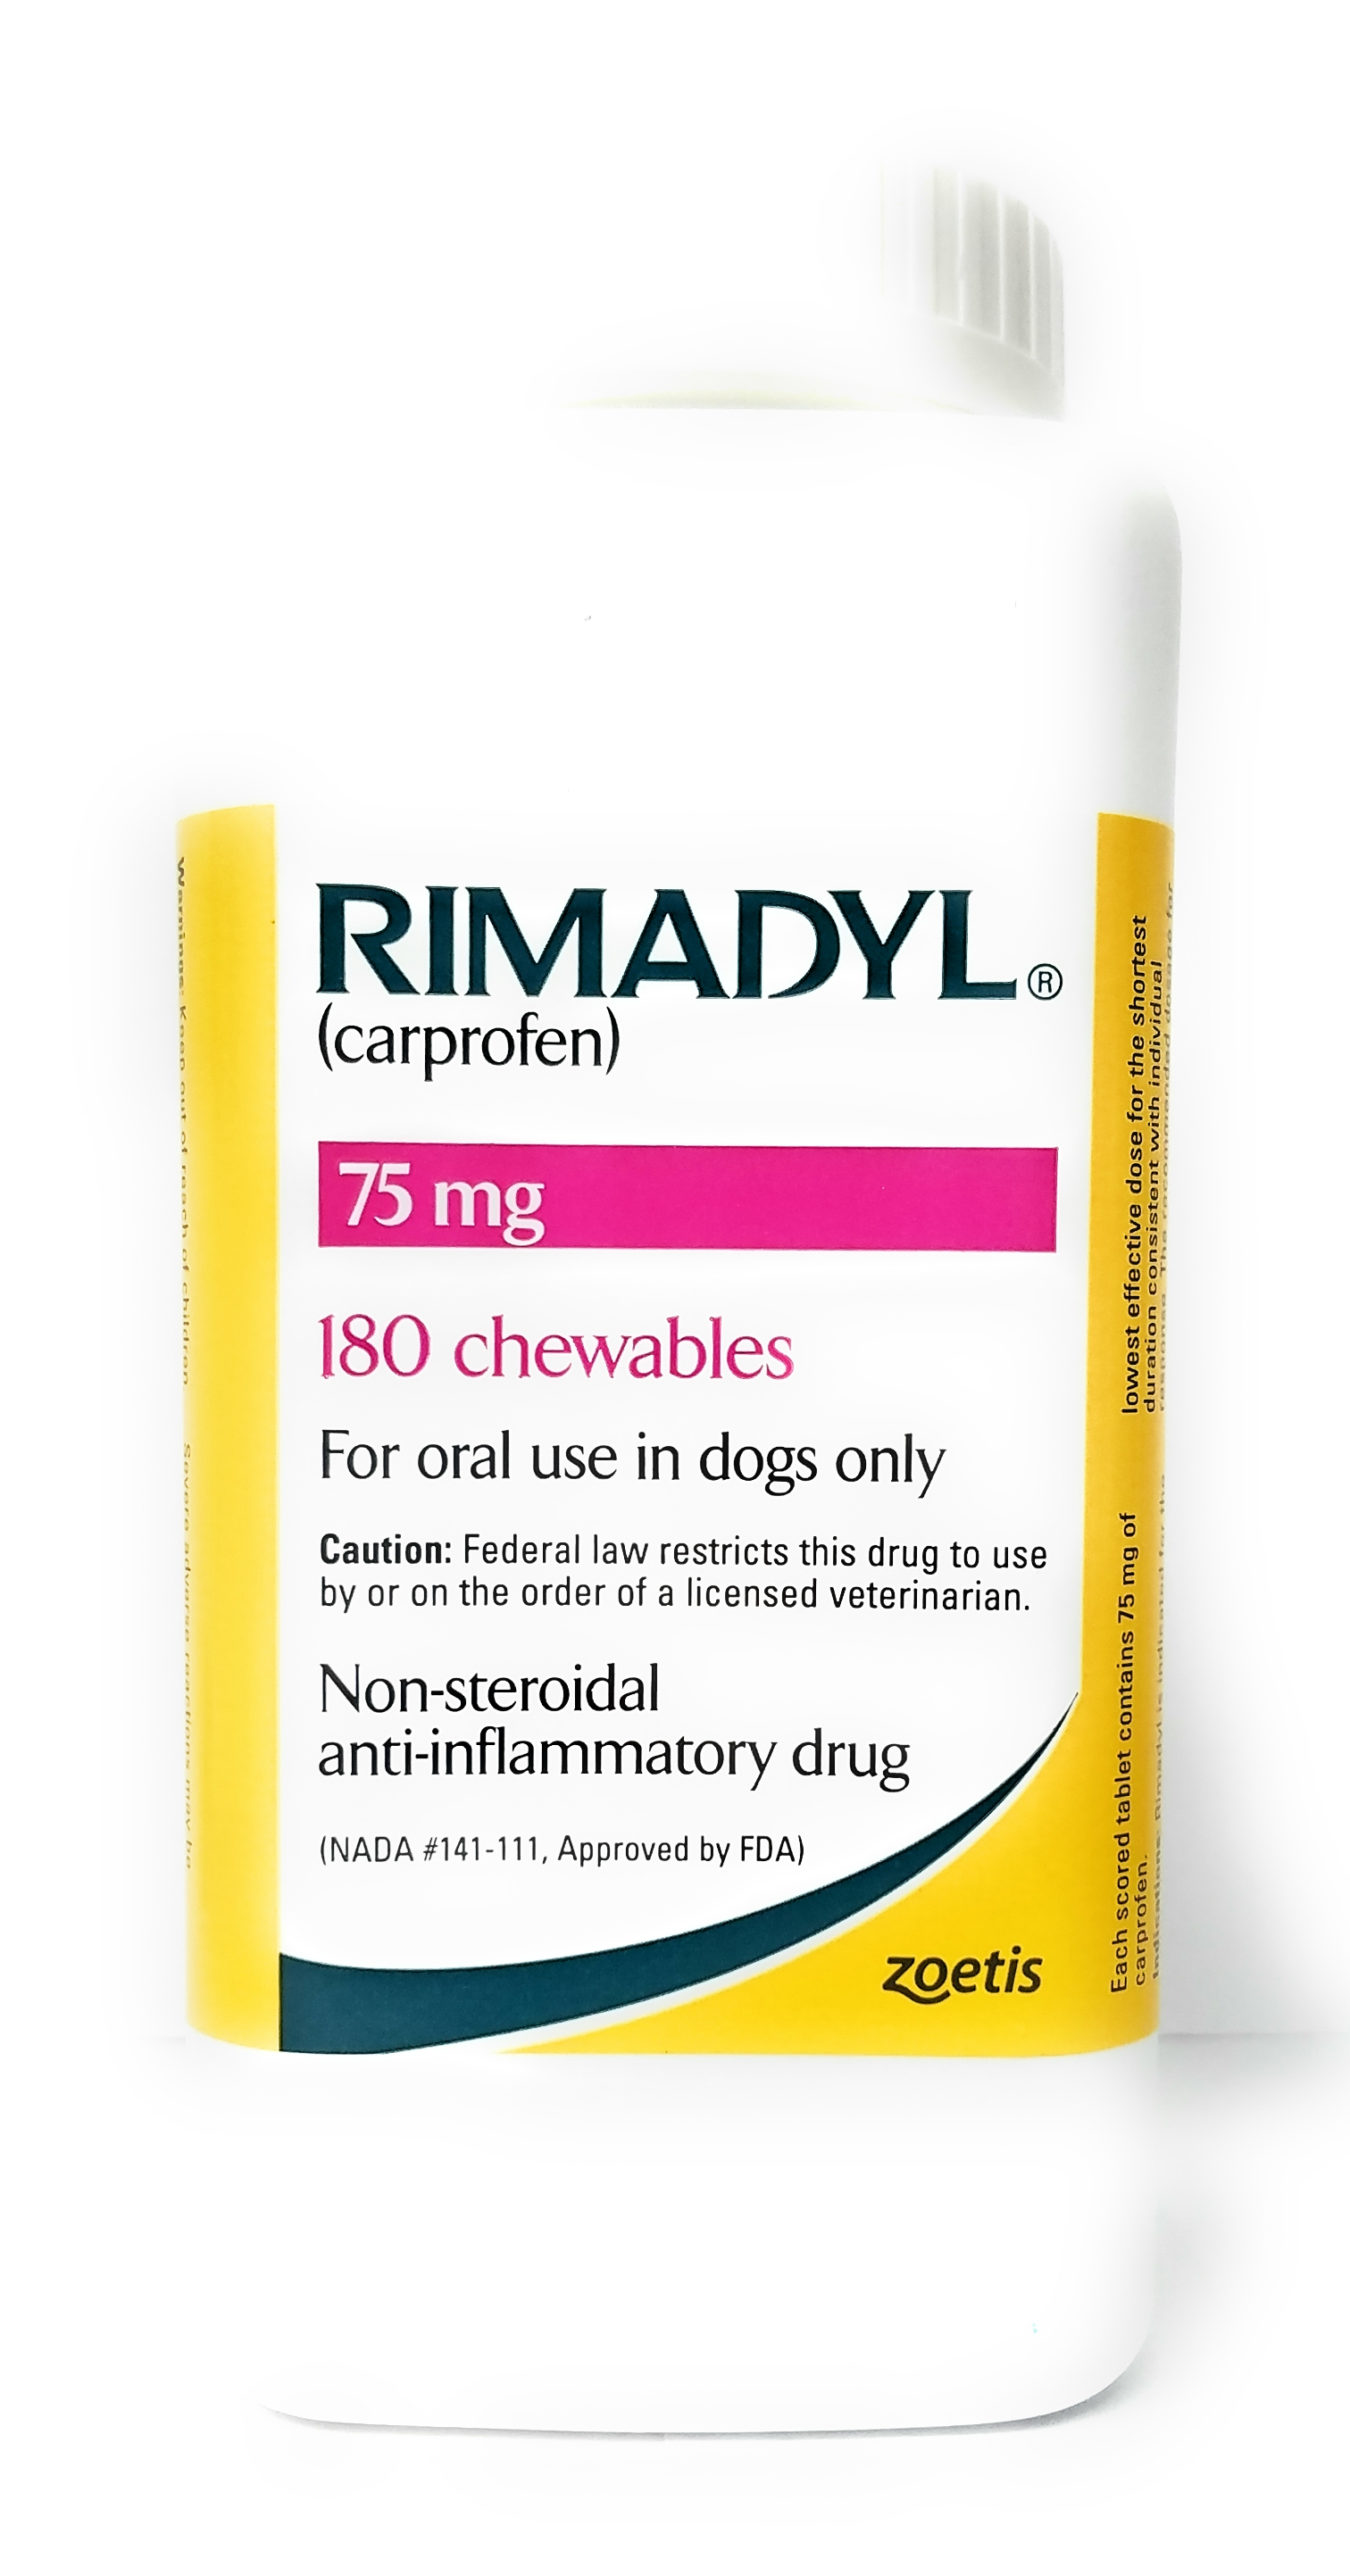 vet-approved-rx-rimadyl-75mg-chewable-tablets-60-count-bottle-for-pets